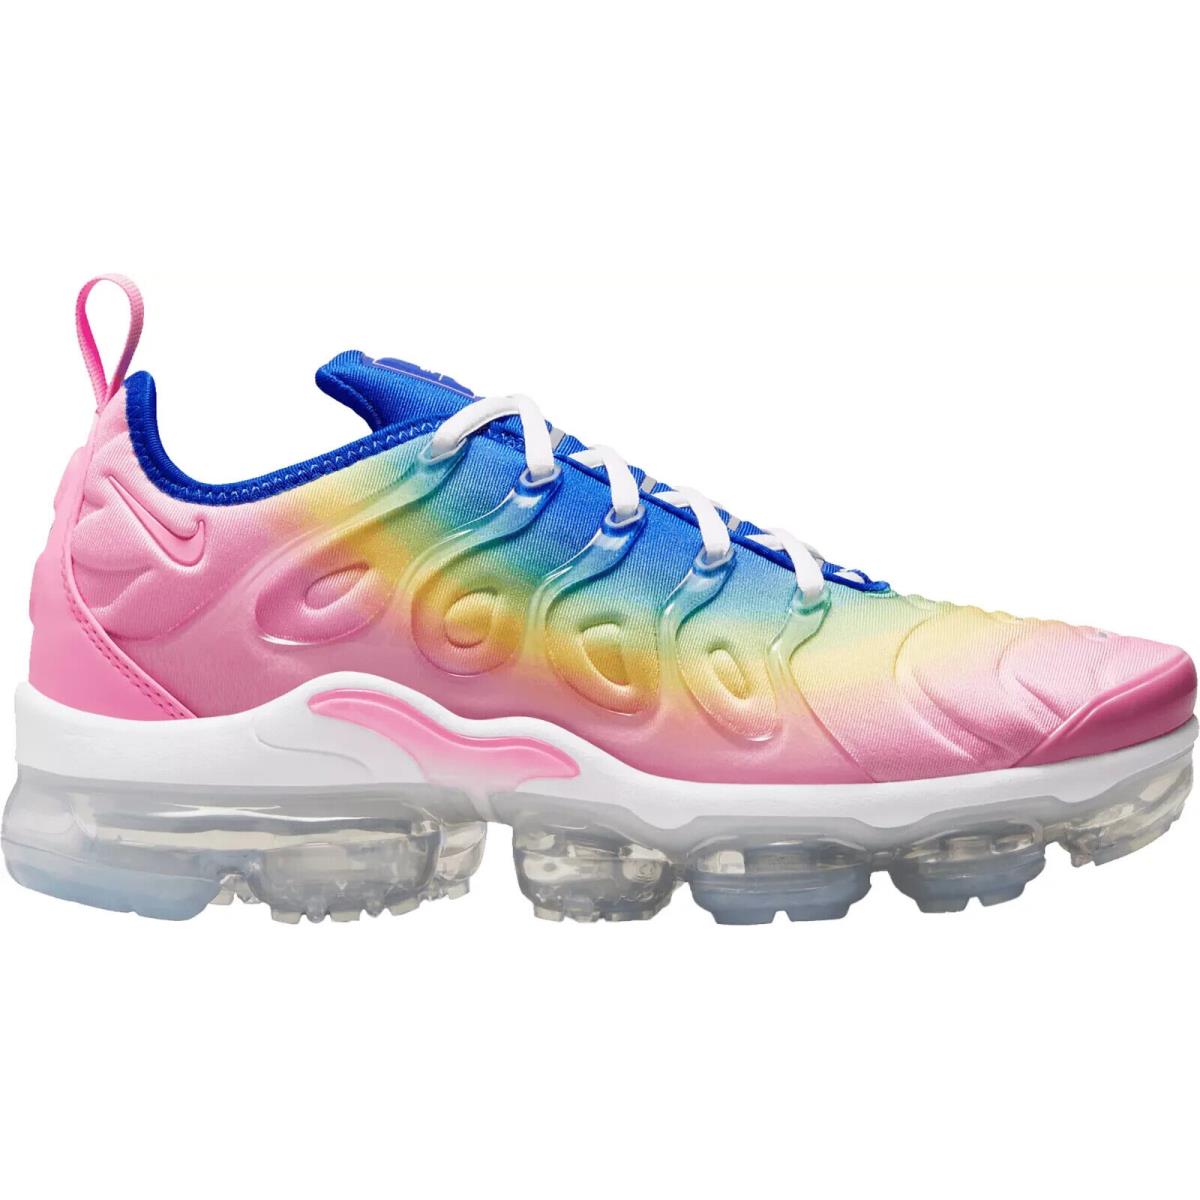 Nike Air Vapormax Plus Women`s Running Shoes All Colors US Sizes 6-11 Pink Spell/Citron Pulse/Spring Green